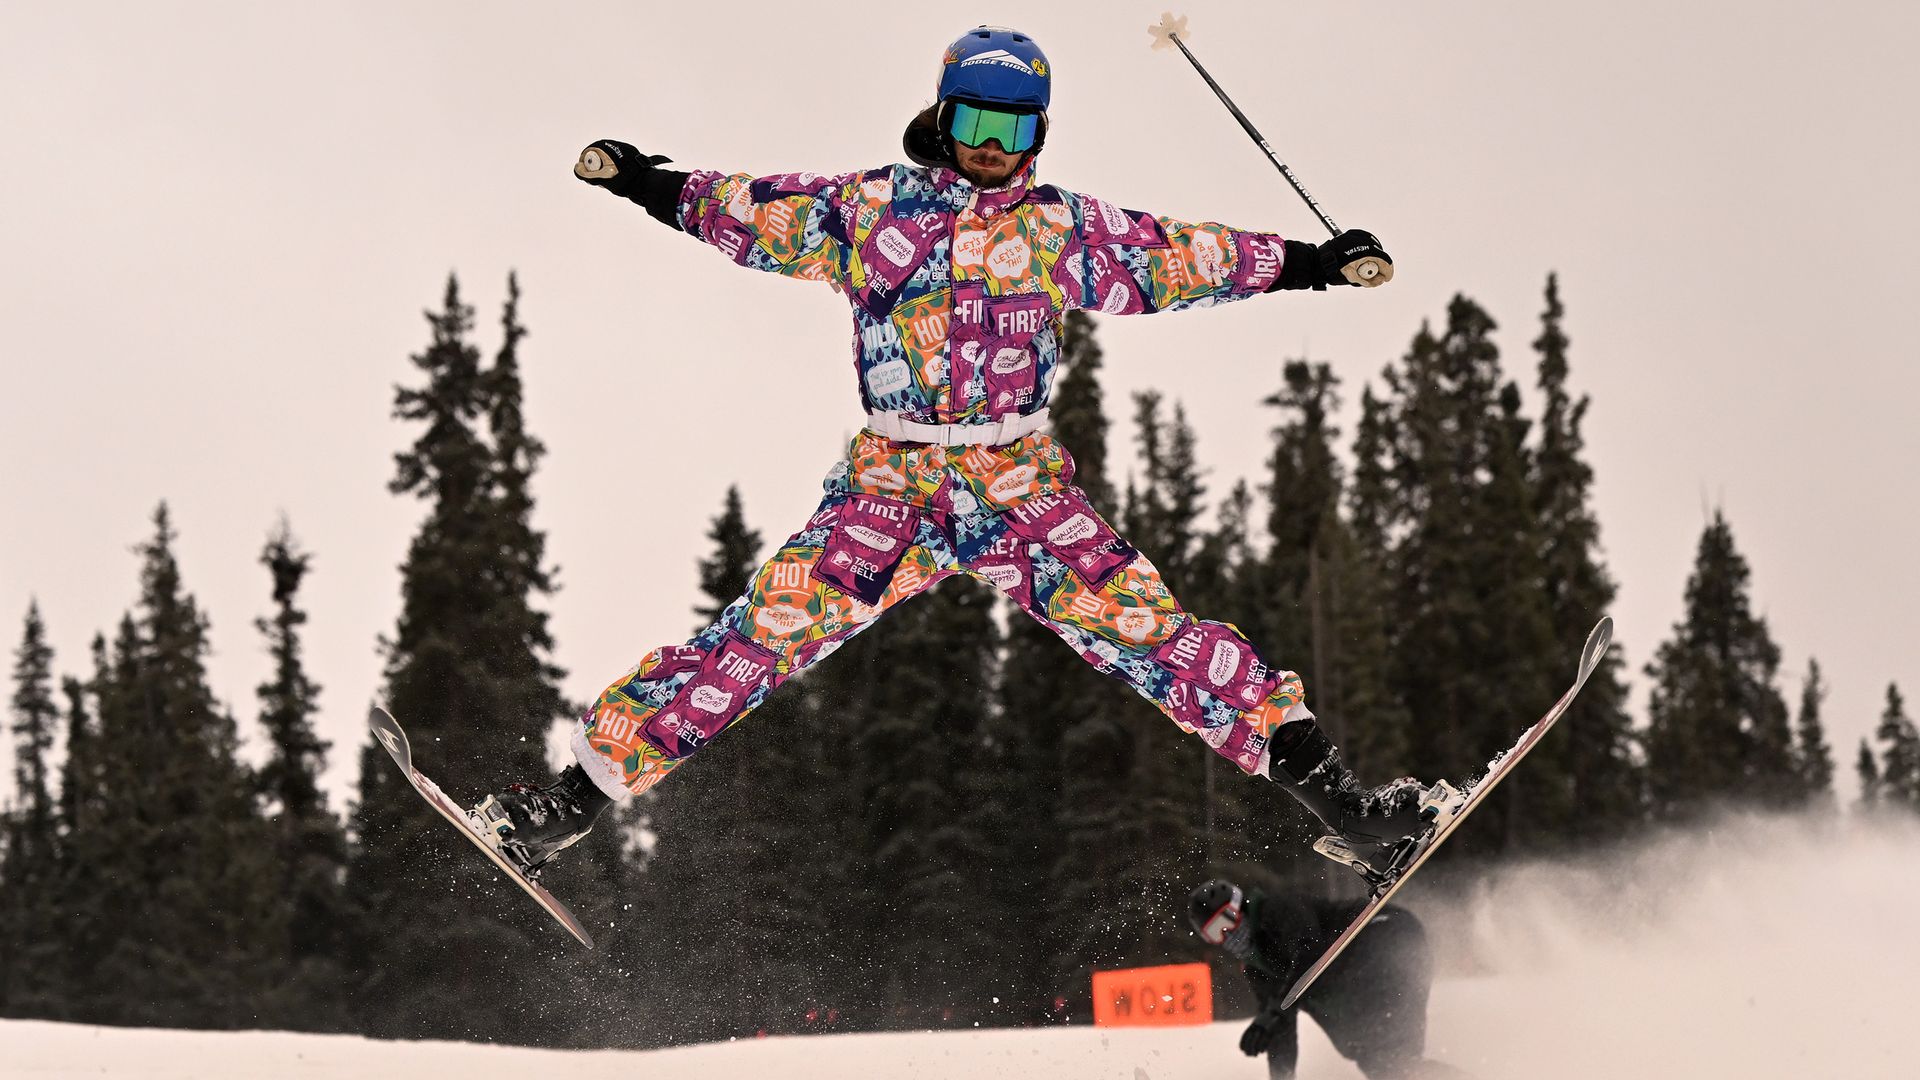 Skier Andrew Hoff catches some air off a jump on the first day of the 2022-23 ski season Arapahoe Basin Ski Area. Photo: Helen H. Richardson/Denver Post via Getty Images